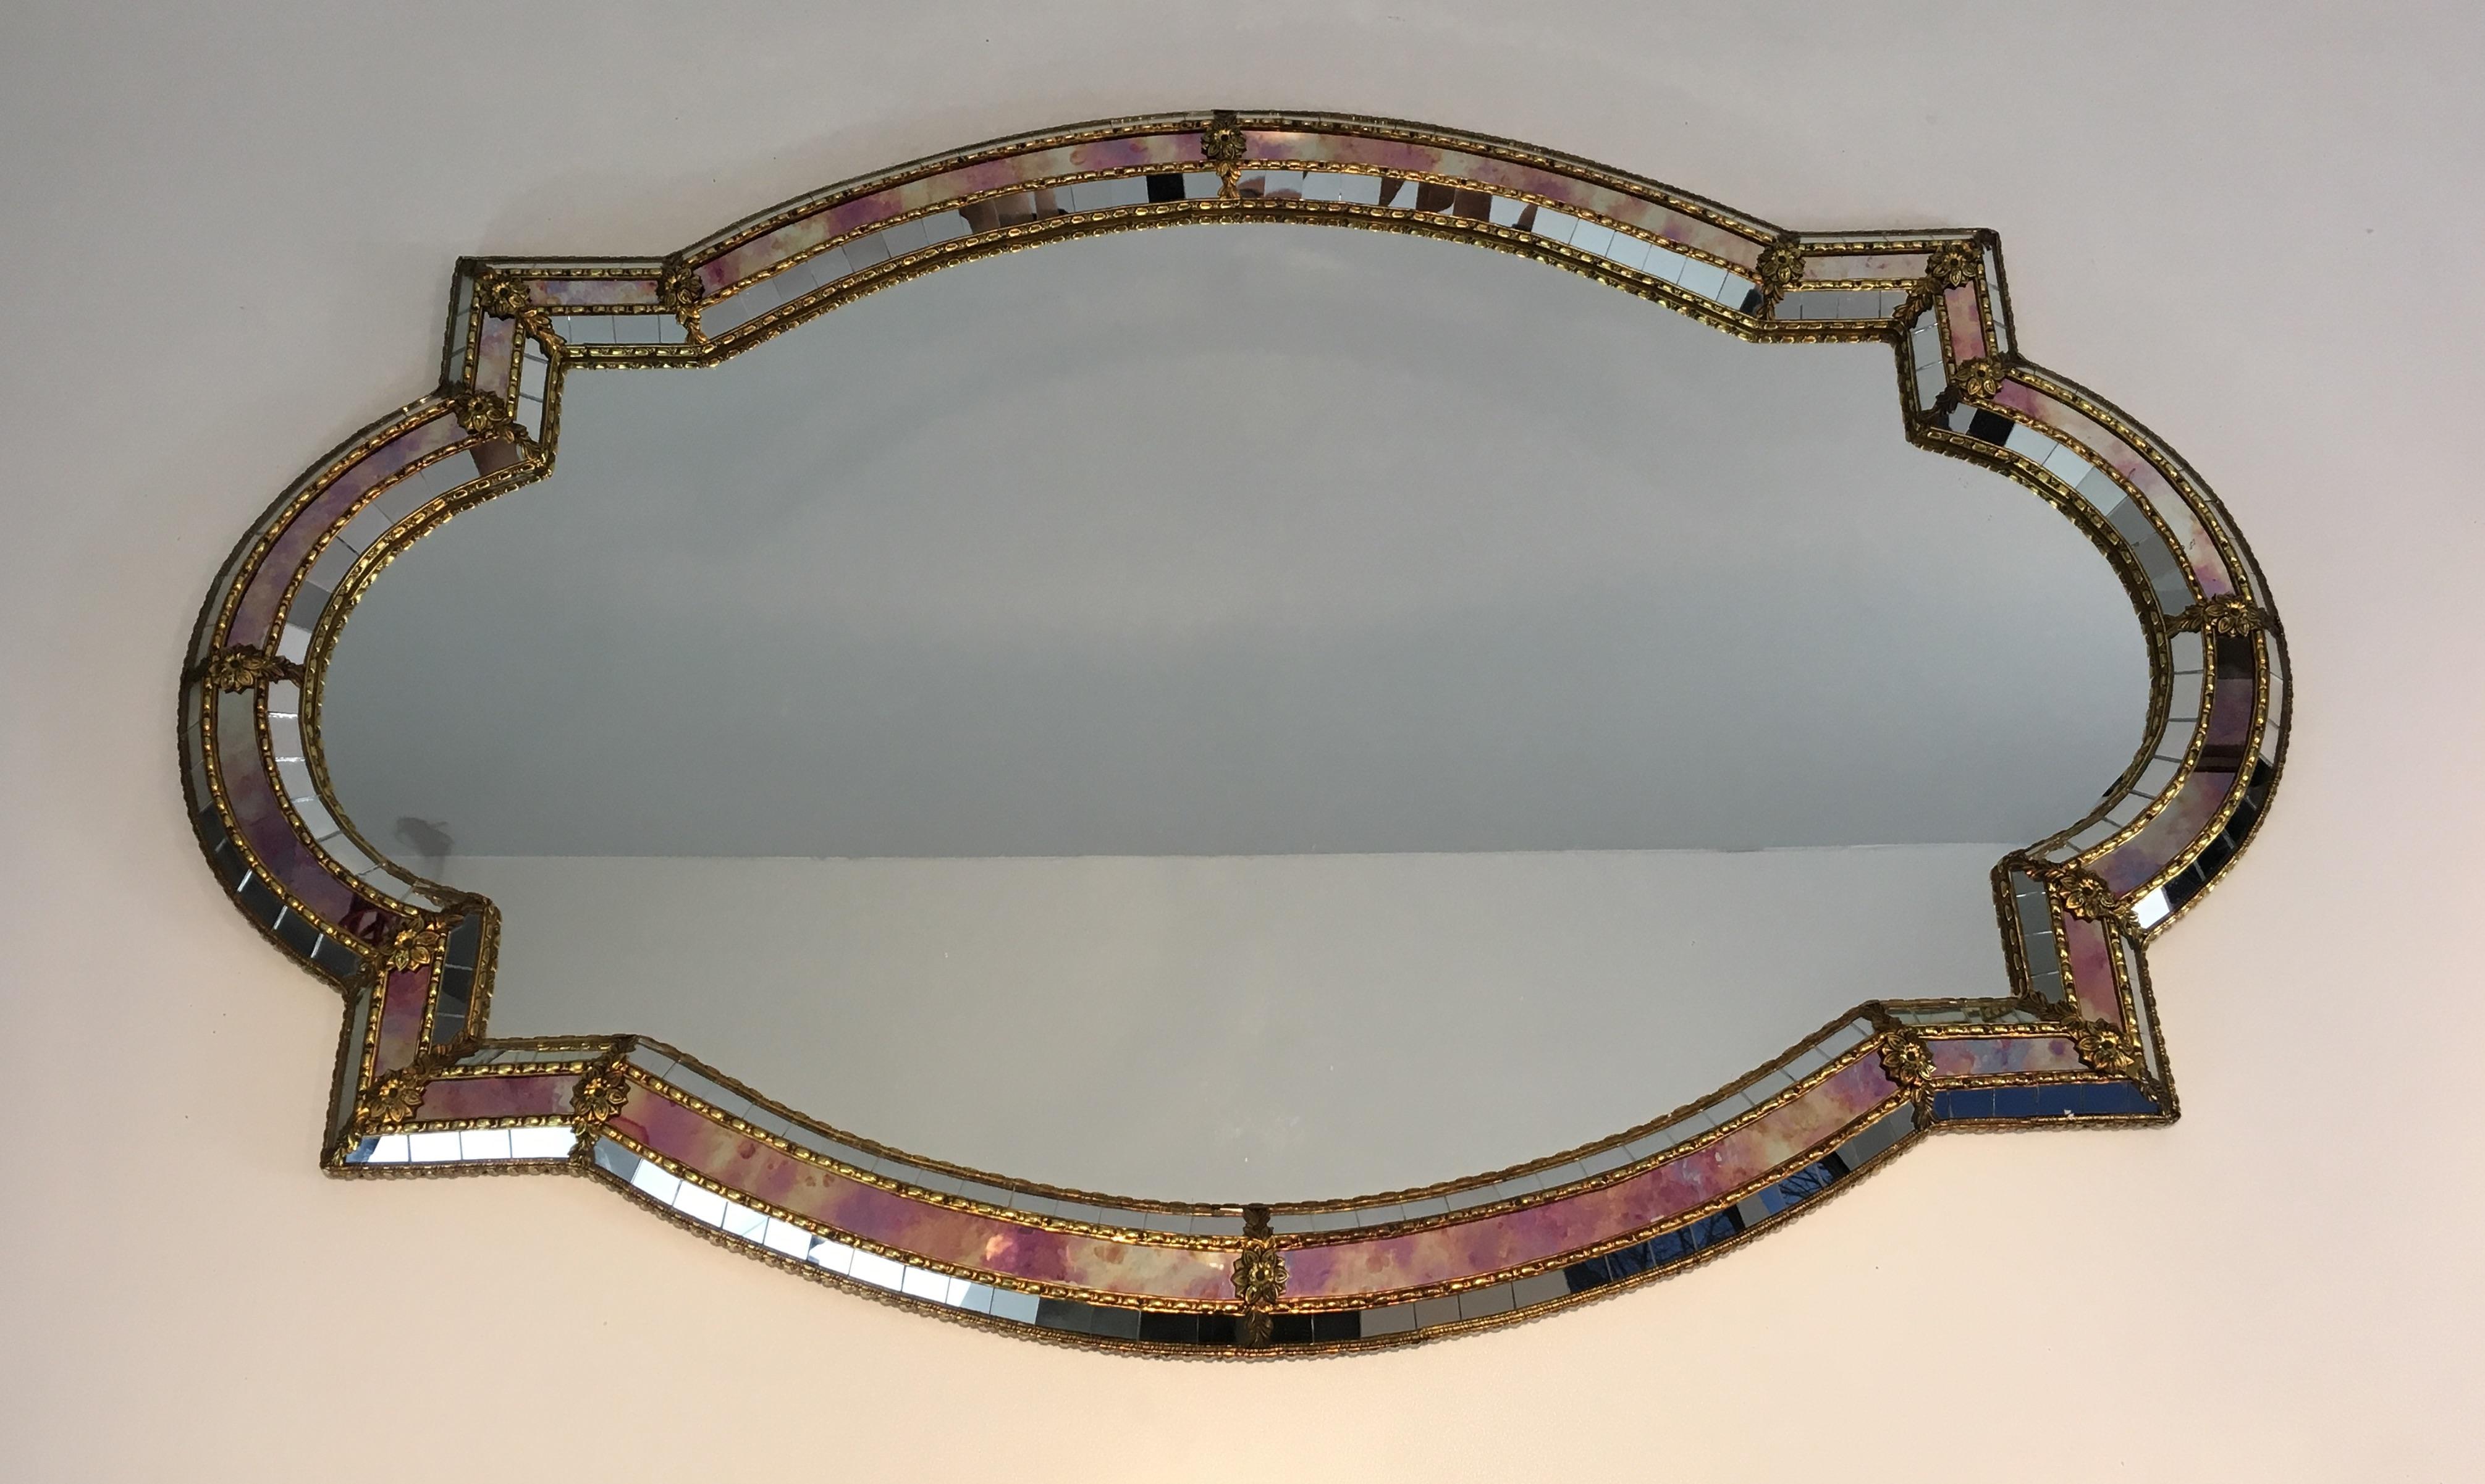 Unusual Shape Multi-Faceted Mirror with Mirrors Mosaics, Brass Flowers 10